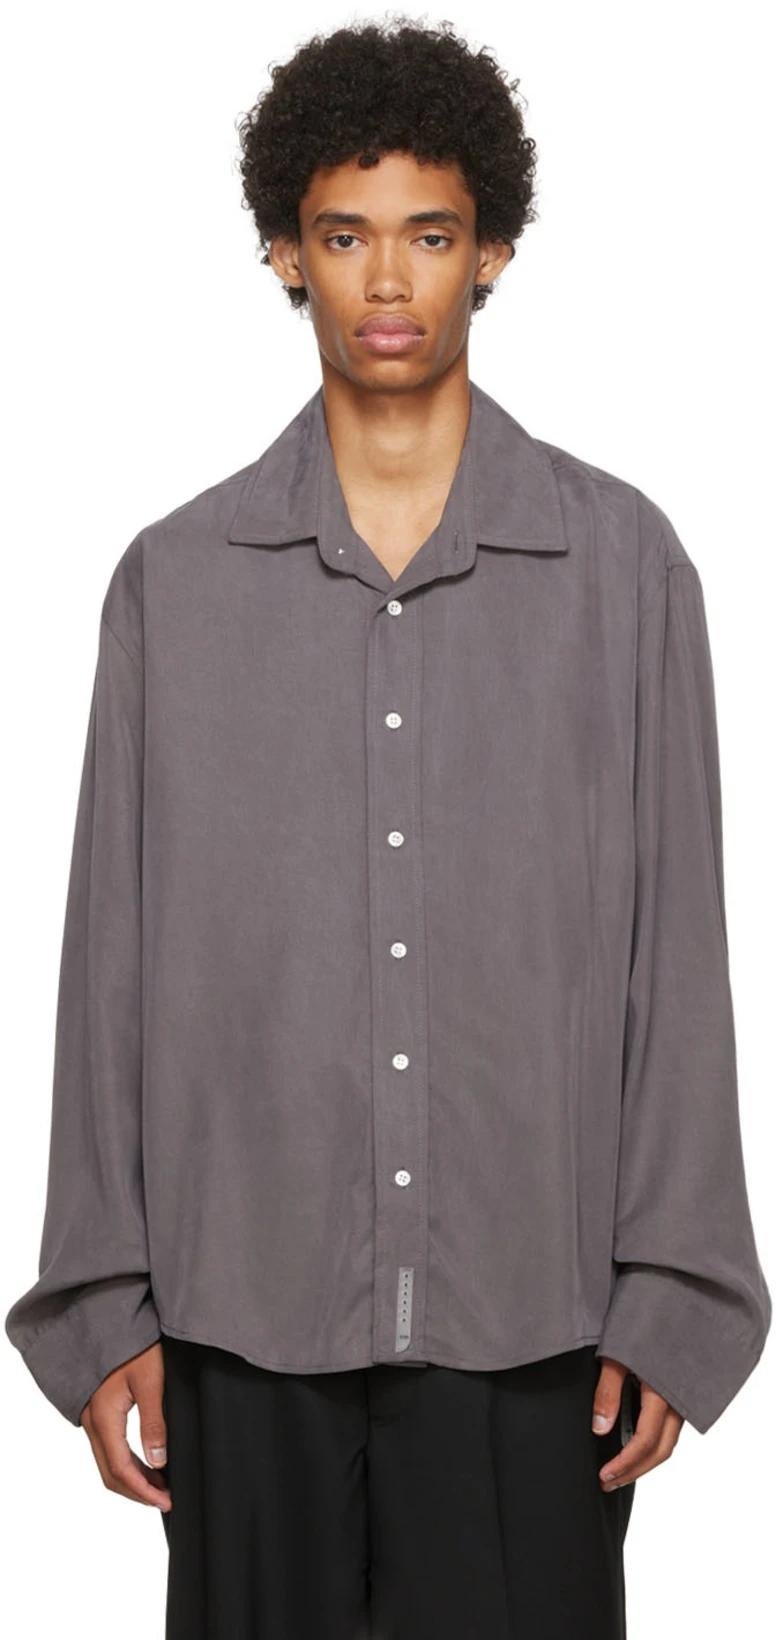 Gray Easy Shirt by CONNOR MC KNIGHT